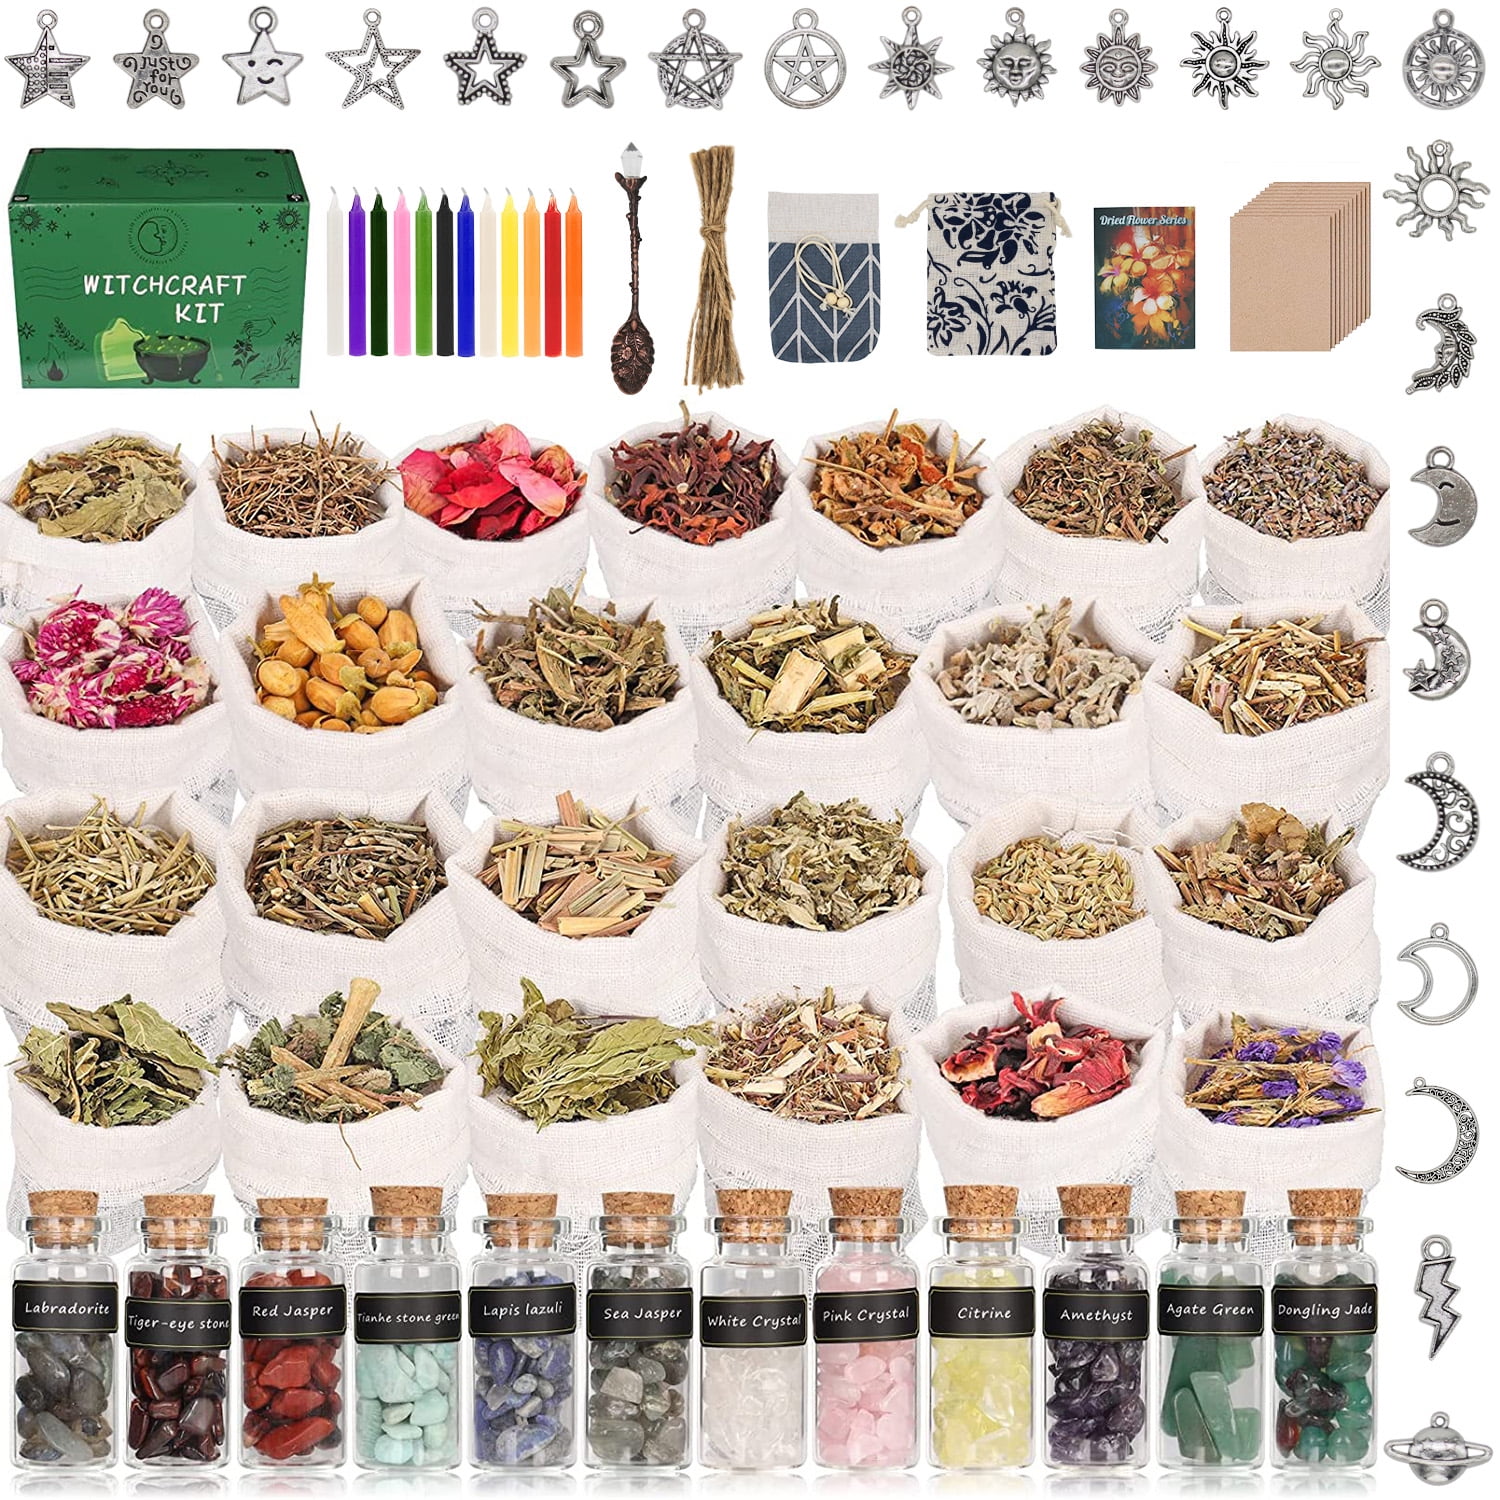 IRmm Witchcraft Supplies Kit 110 PCS,for Beginner Witchcraft Kit for Altar  Supplies, with Crystal Jars, Dried Herbs, Colored Magic Candles,Witch